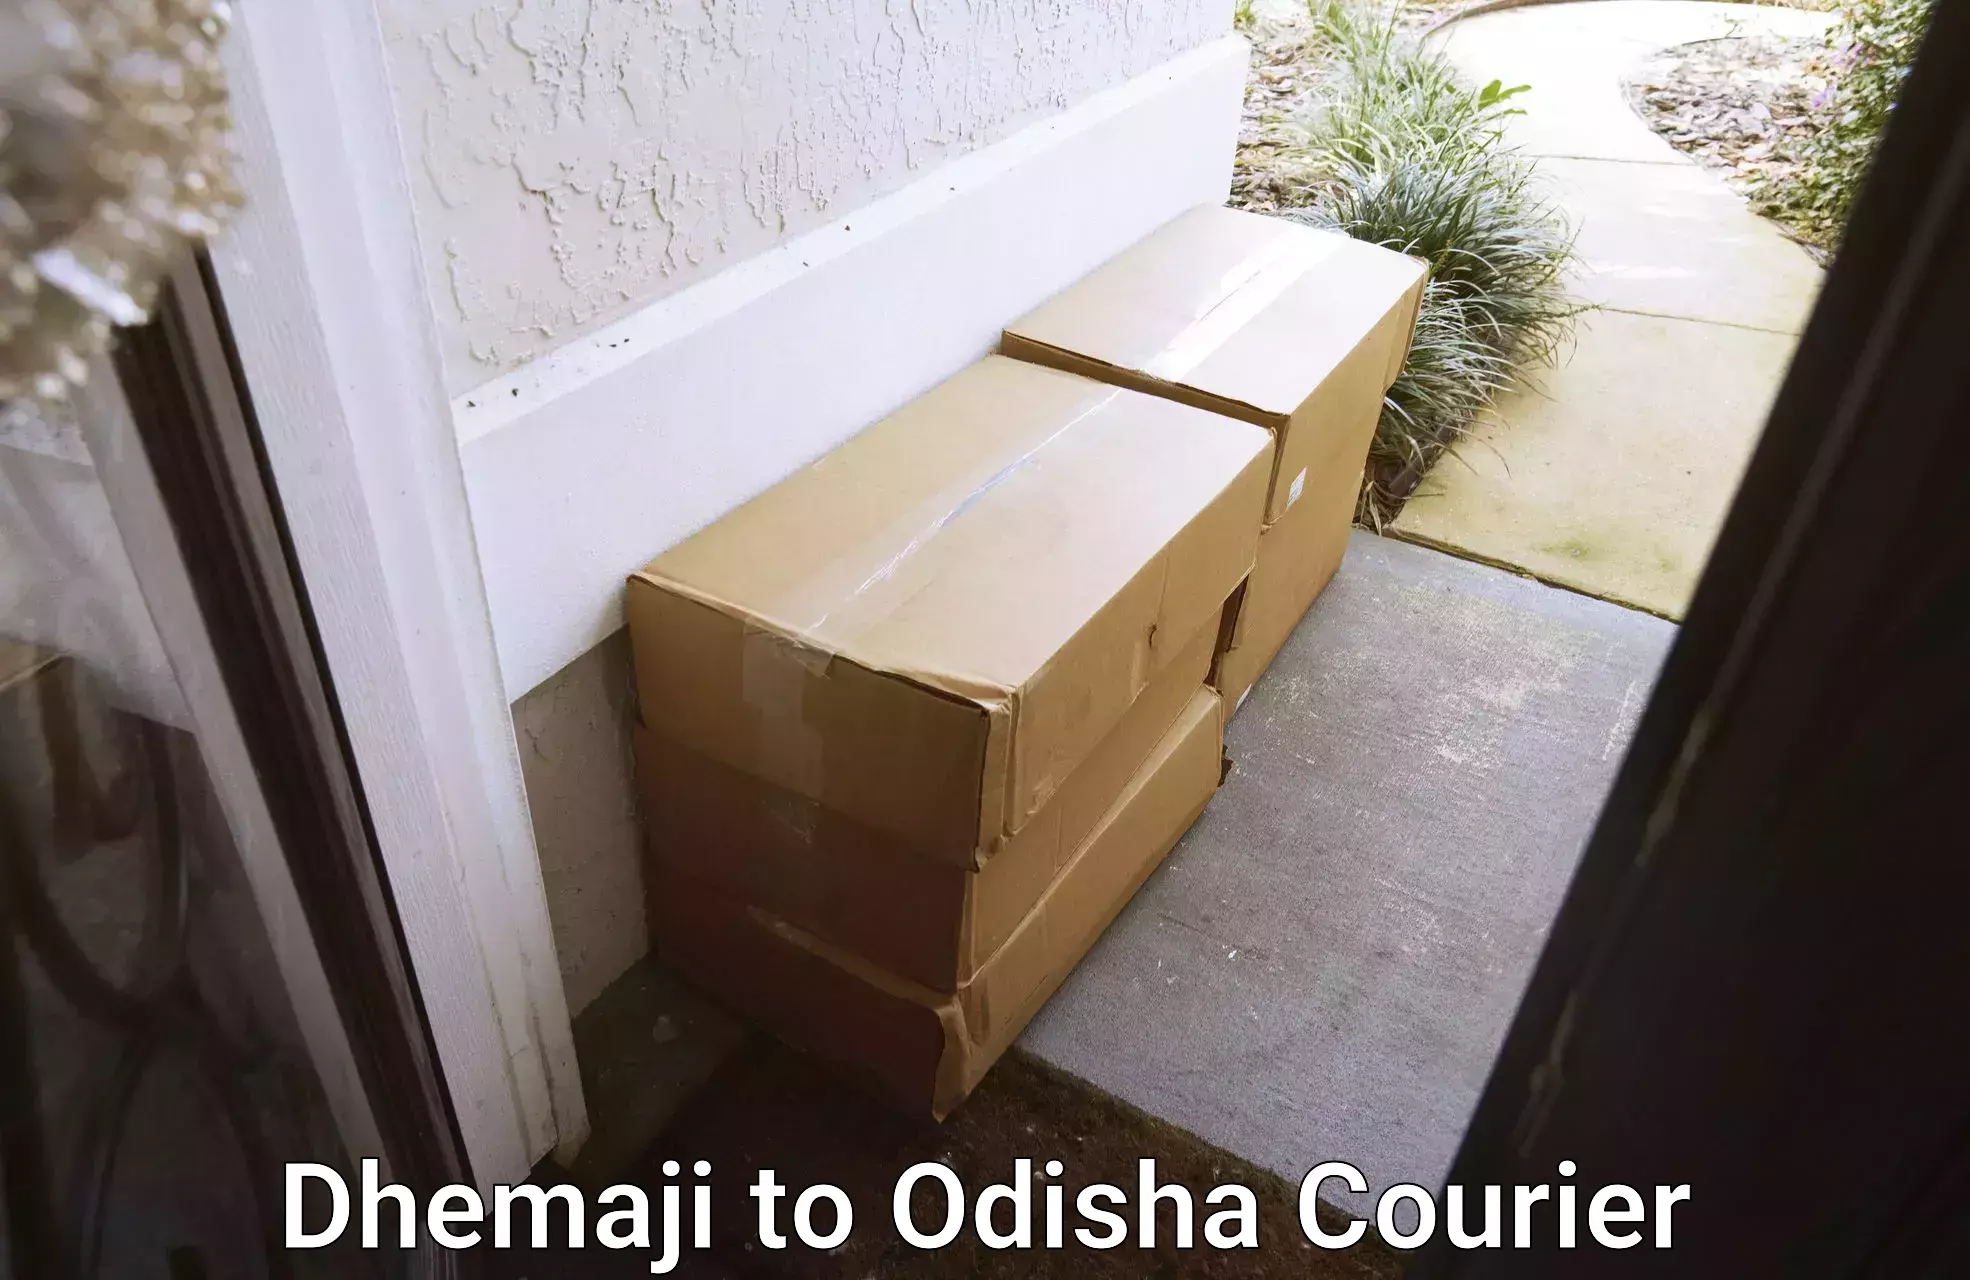 Courier service booking Dhemaji to Kalinga Institute of Industrial Technology Bhubaneswar